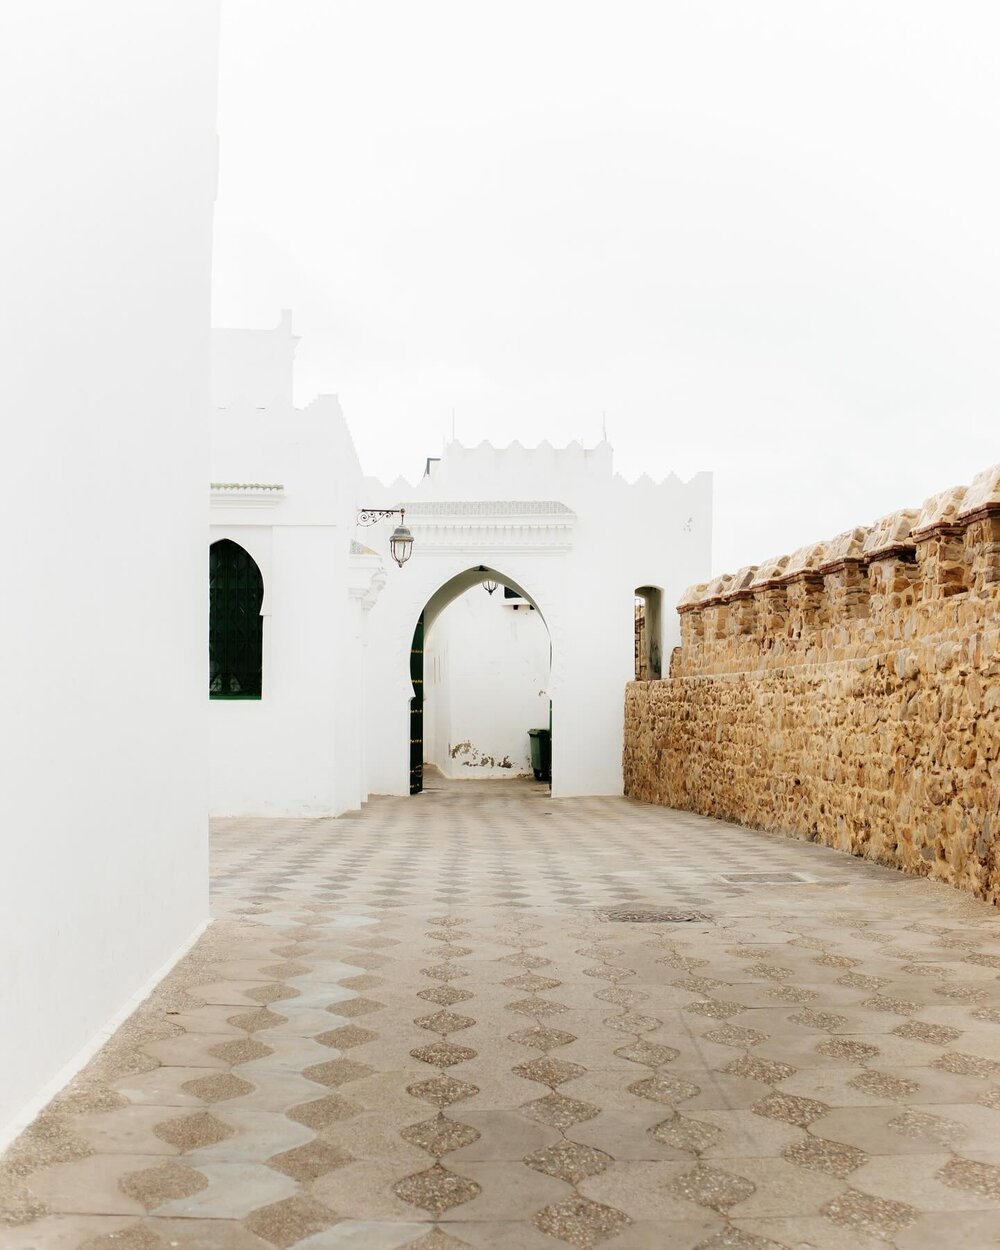 From a rainy day in Asilah, Morocco